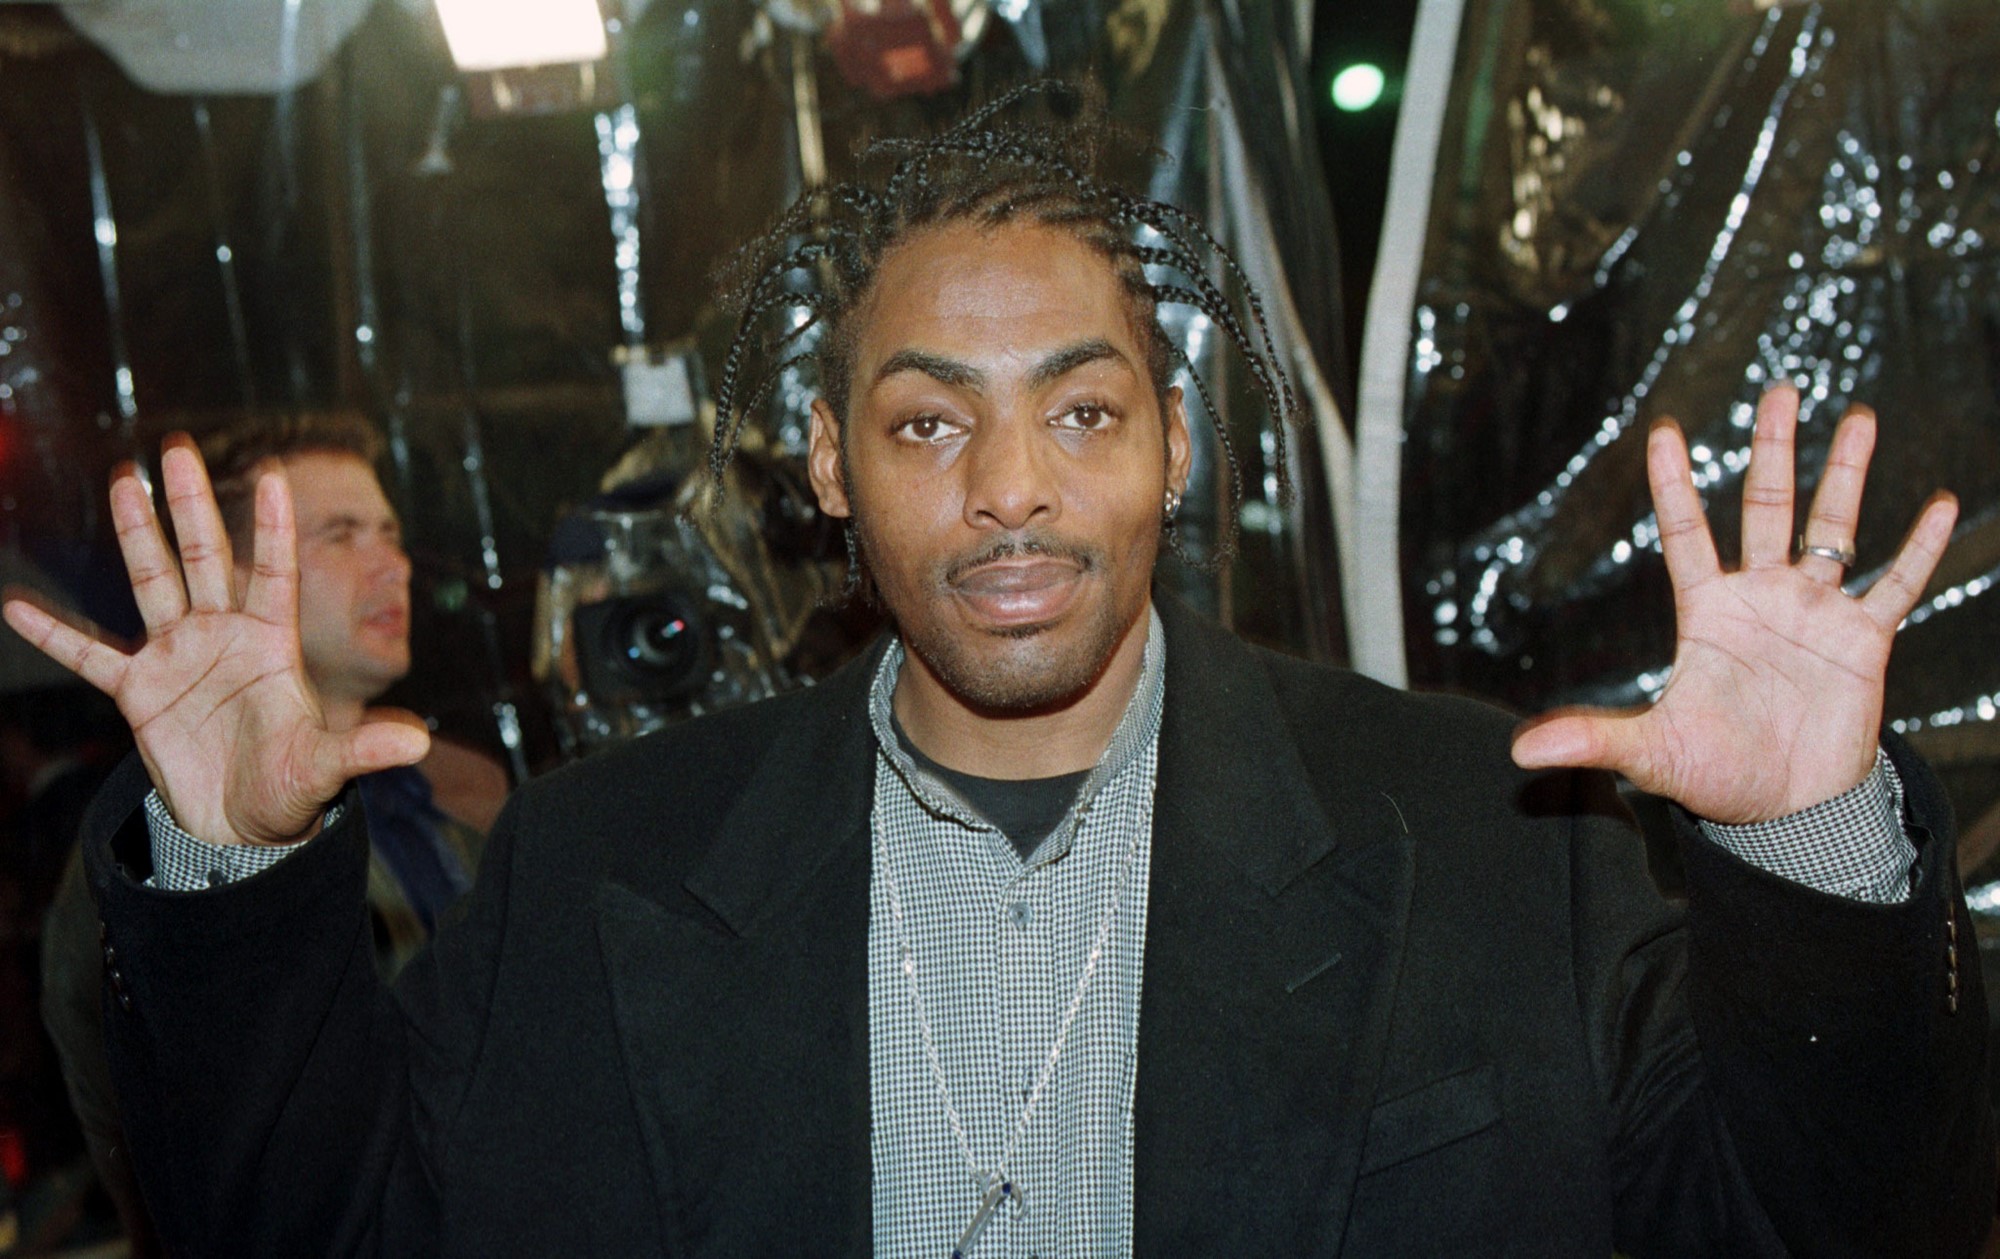 Coolio poses for a photo with his hands in the air.